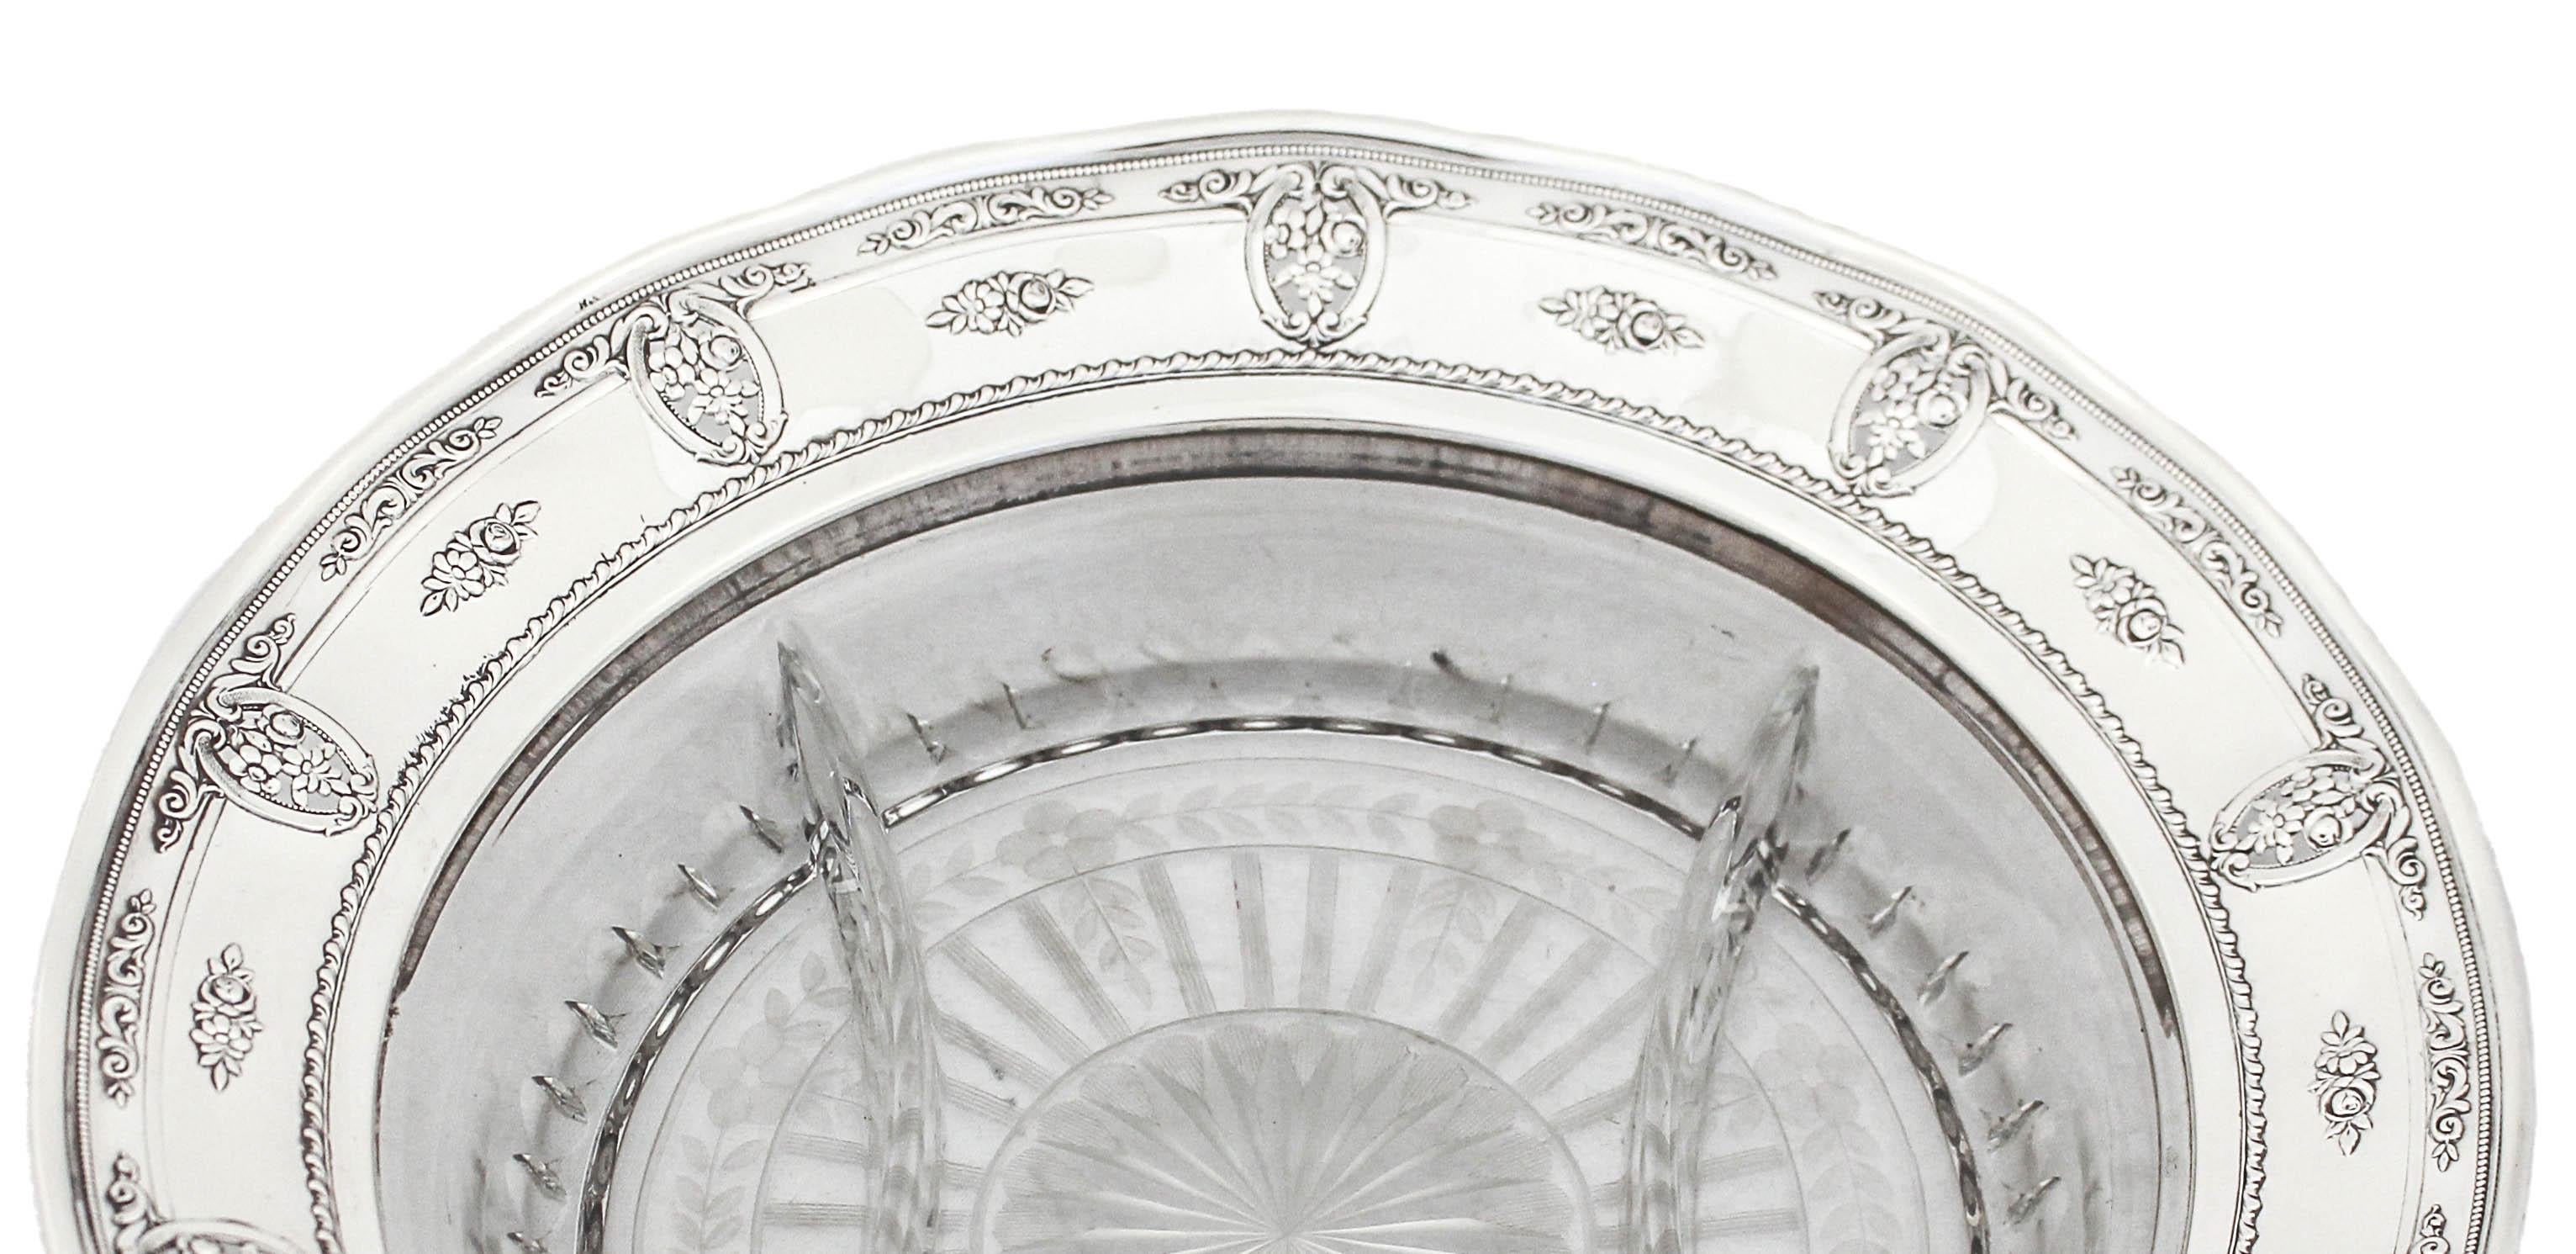 Being offered is a sterling silver and crystal sectional in the Rose Point pattern by Wallace Silversmiths.  The sterling rim is fluted with the Rose Point pattern adorning it. In the center the crystal sectional is divided into three parts; a